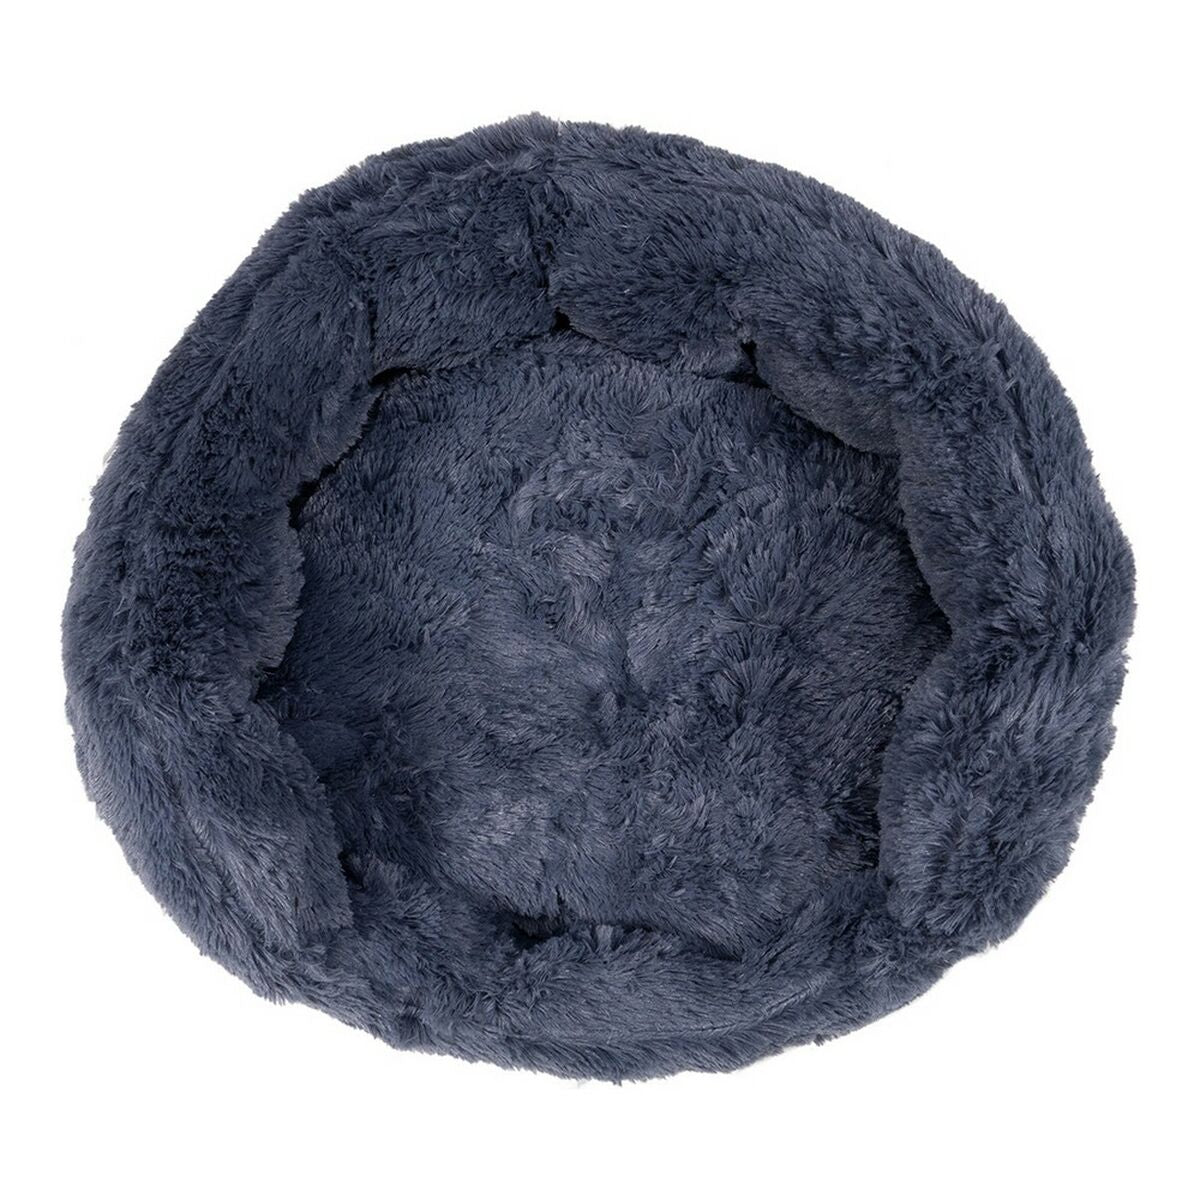 Soft, round cushion dog bed made from long plush material. Bed for Dogs Gloria BABY Grey (75 x 65 cm)